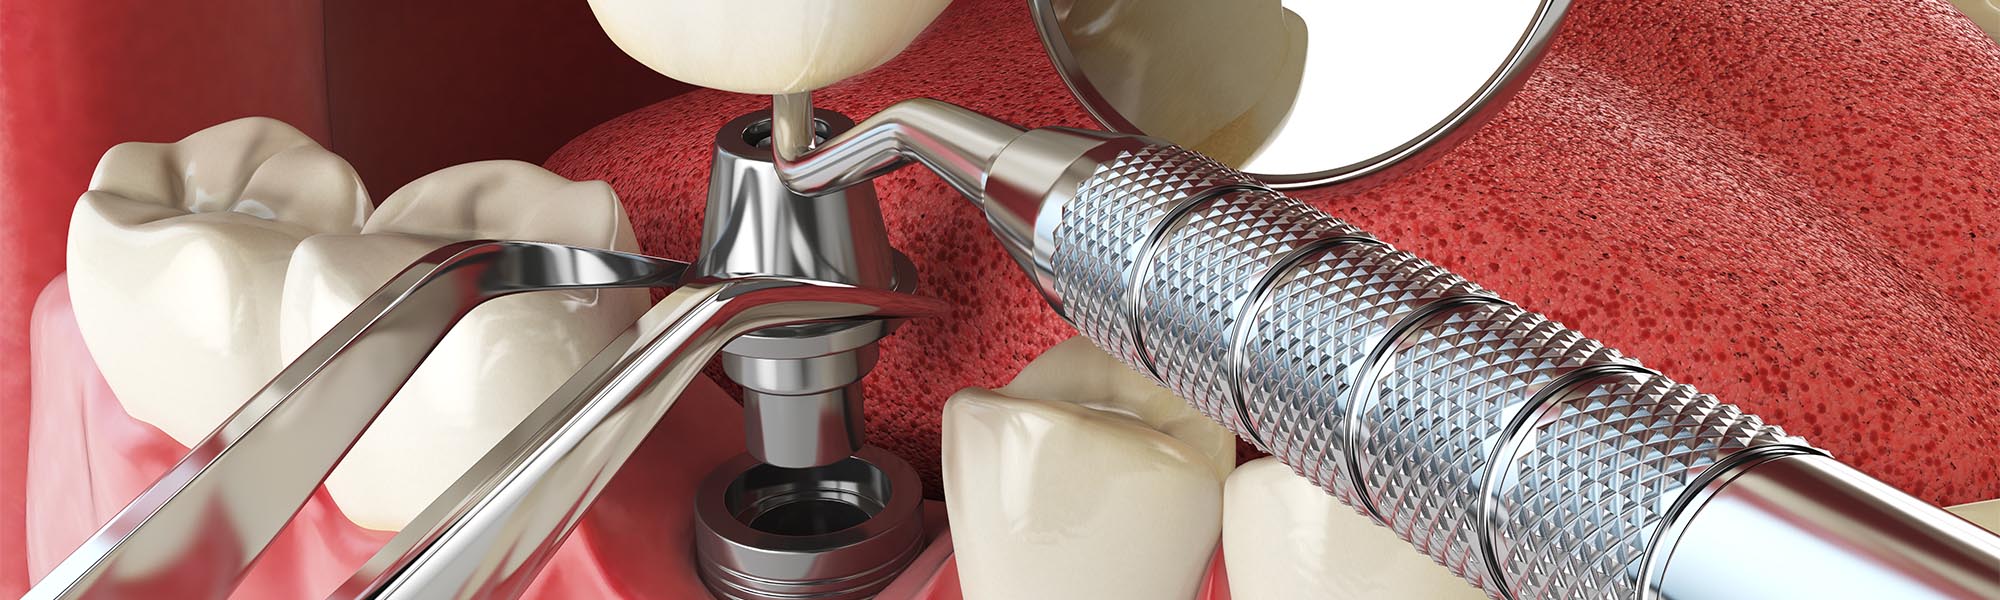 Single Tooth Implants in Whittier CA